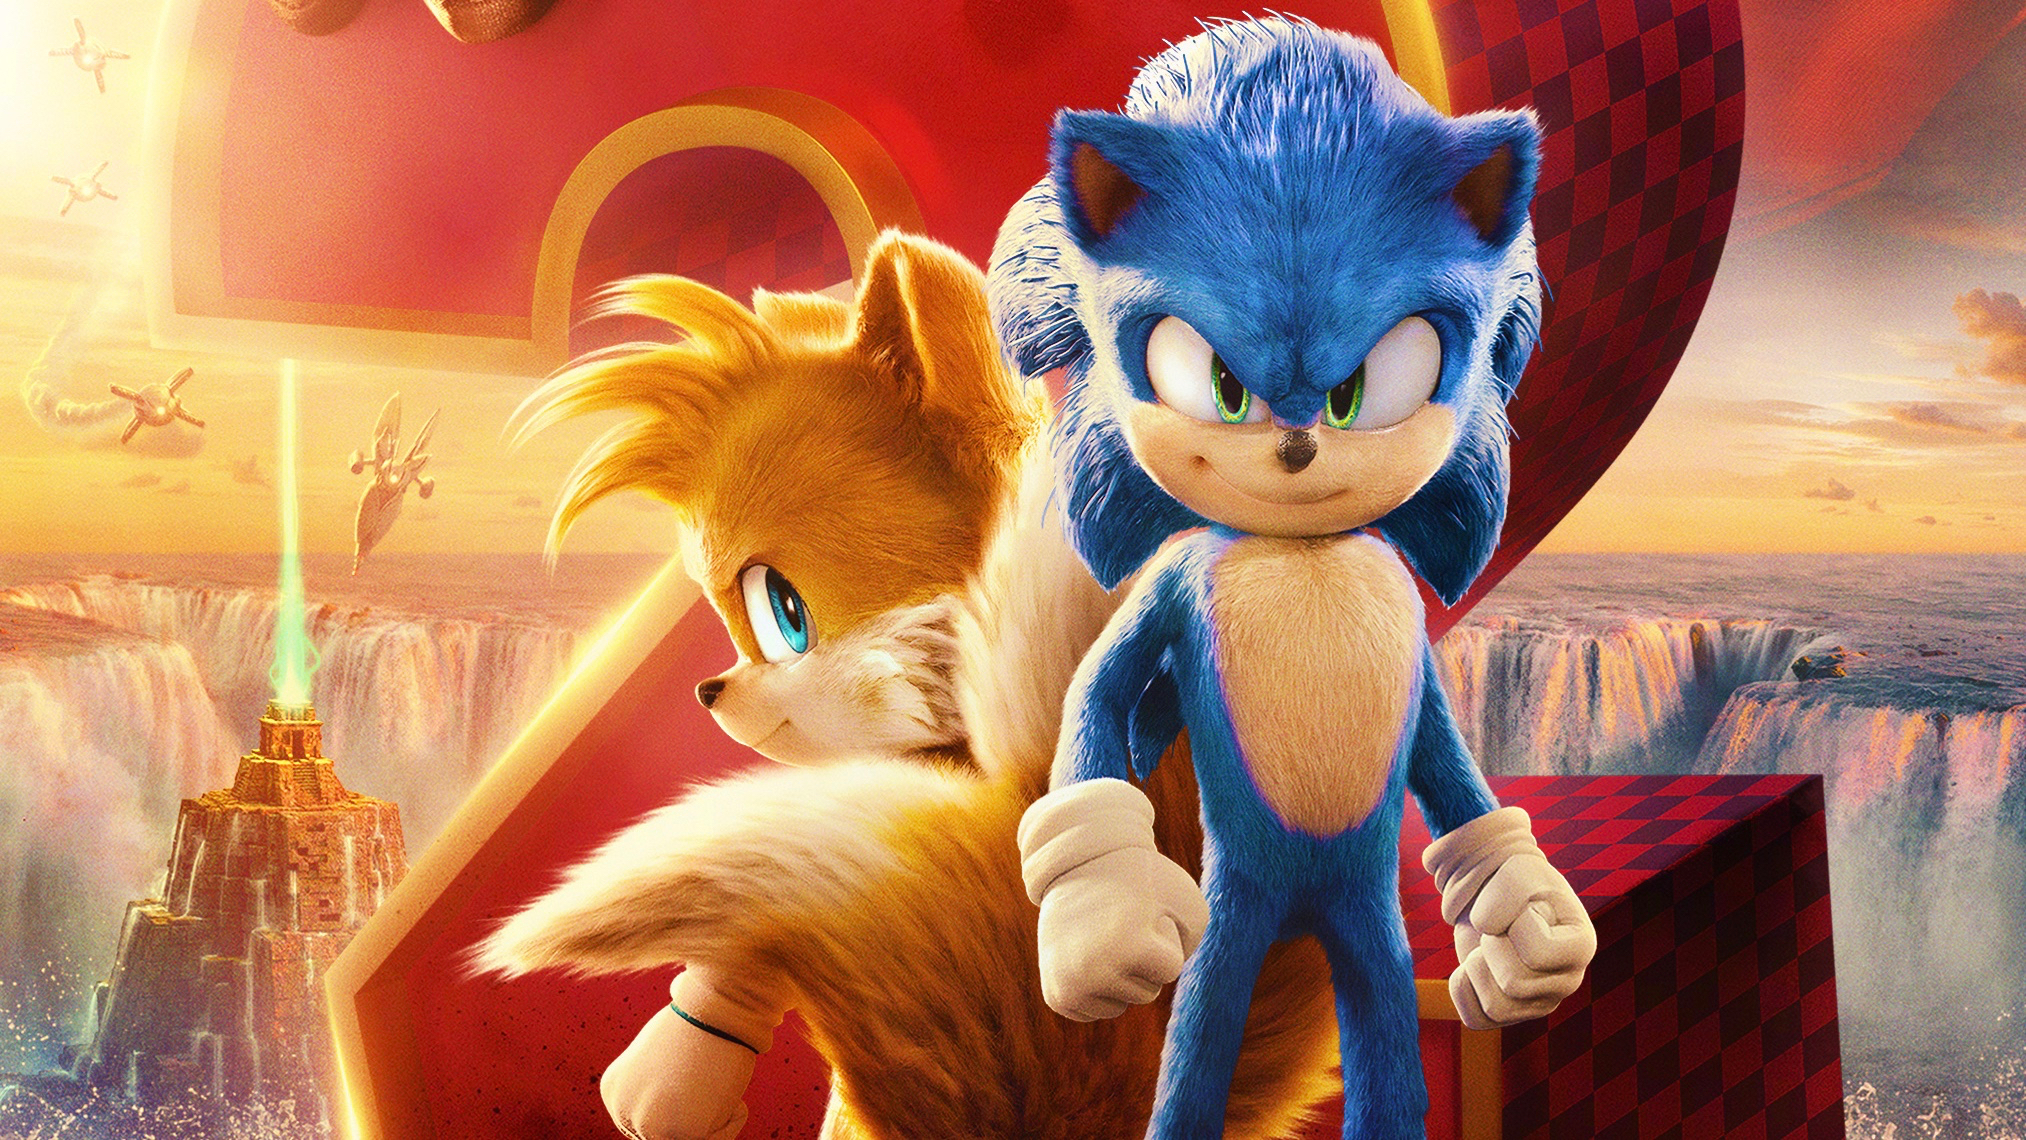 sonic the hedgehog 2, sonic, movie, miles 'tails' prower, sonic the hedgehog